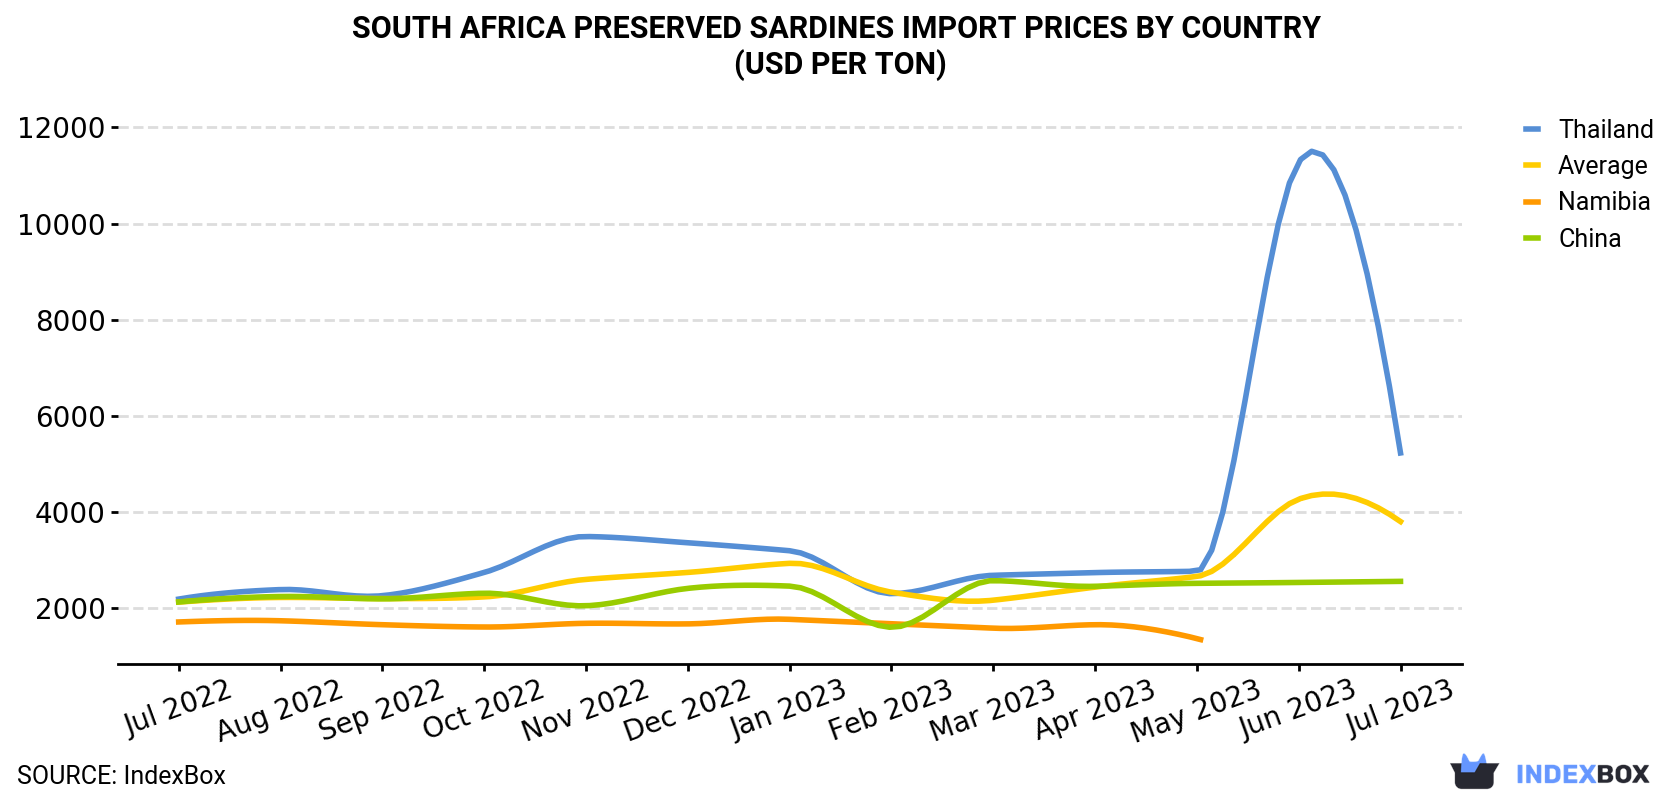 South Africa Preserved Sardines Import Prices By Country (USD Per Ton)